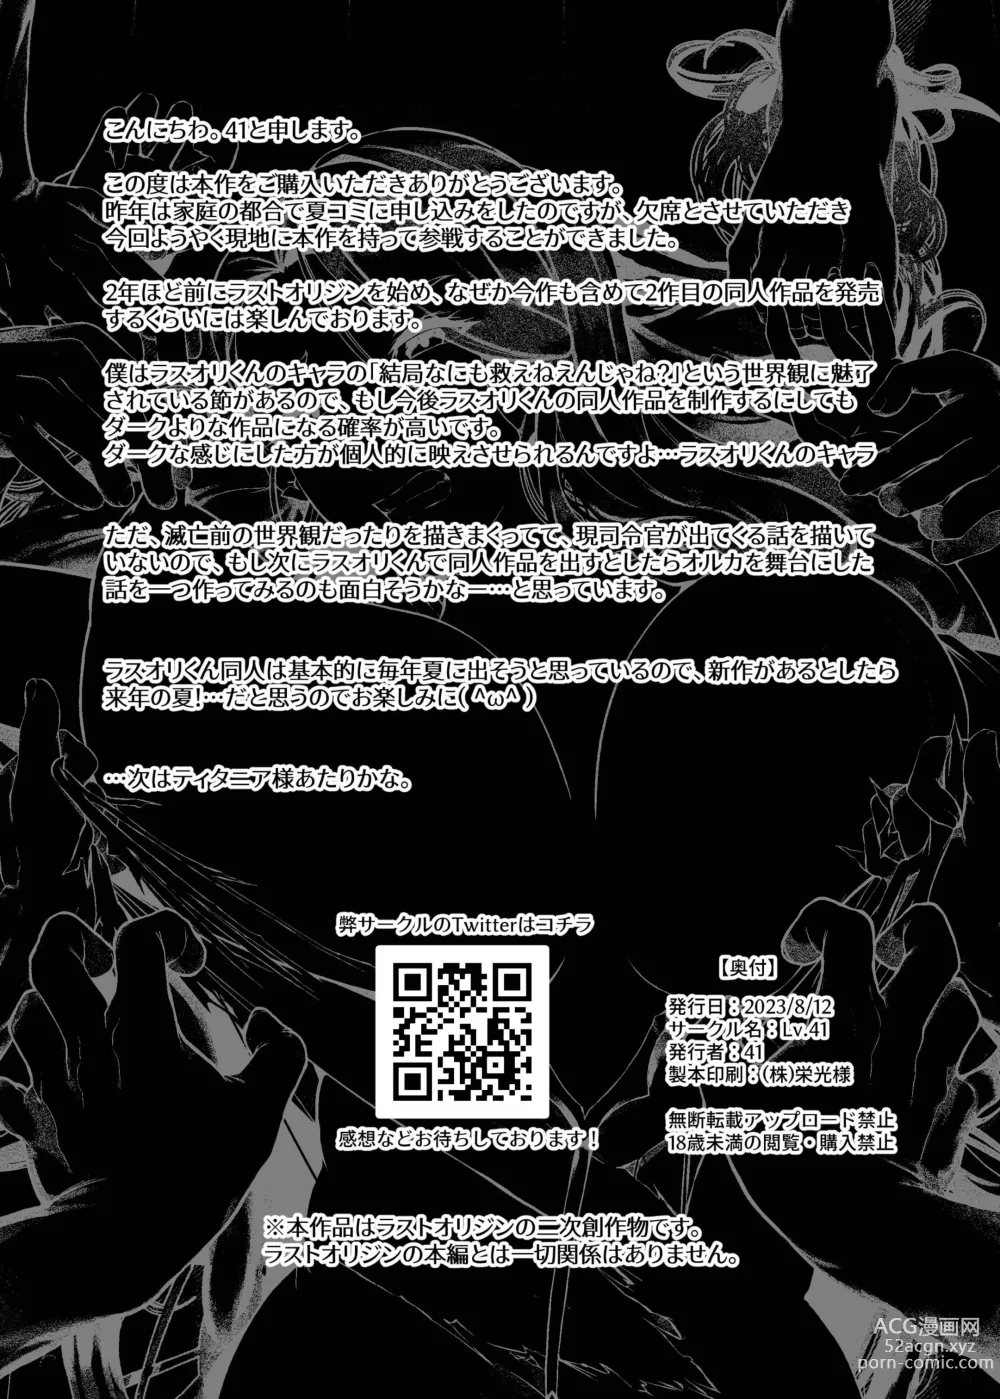 Page 41 of doujinshi ANOTHER ORIGIN Alpha side